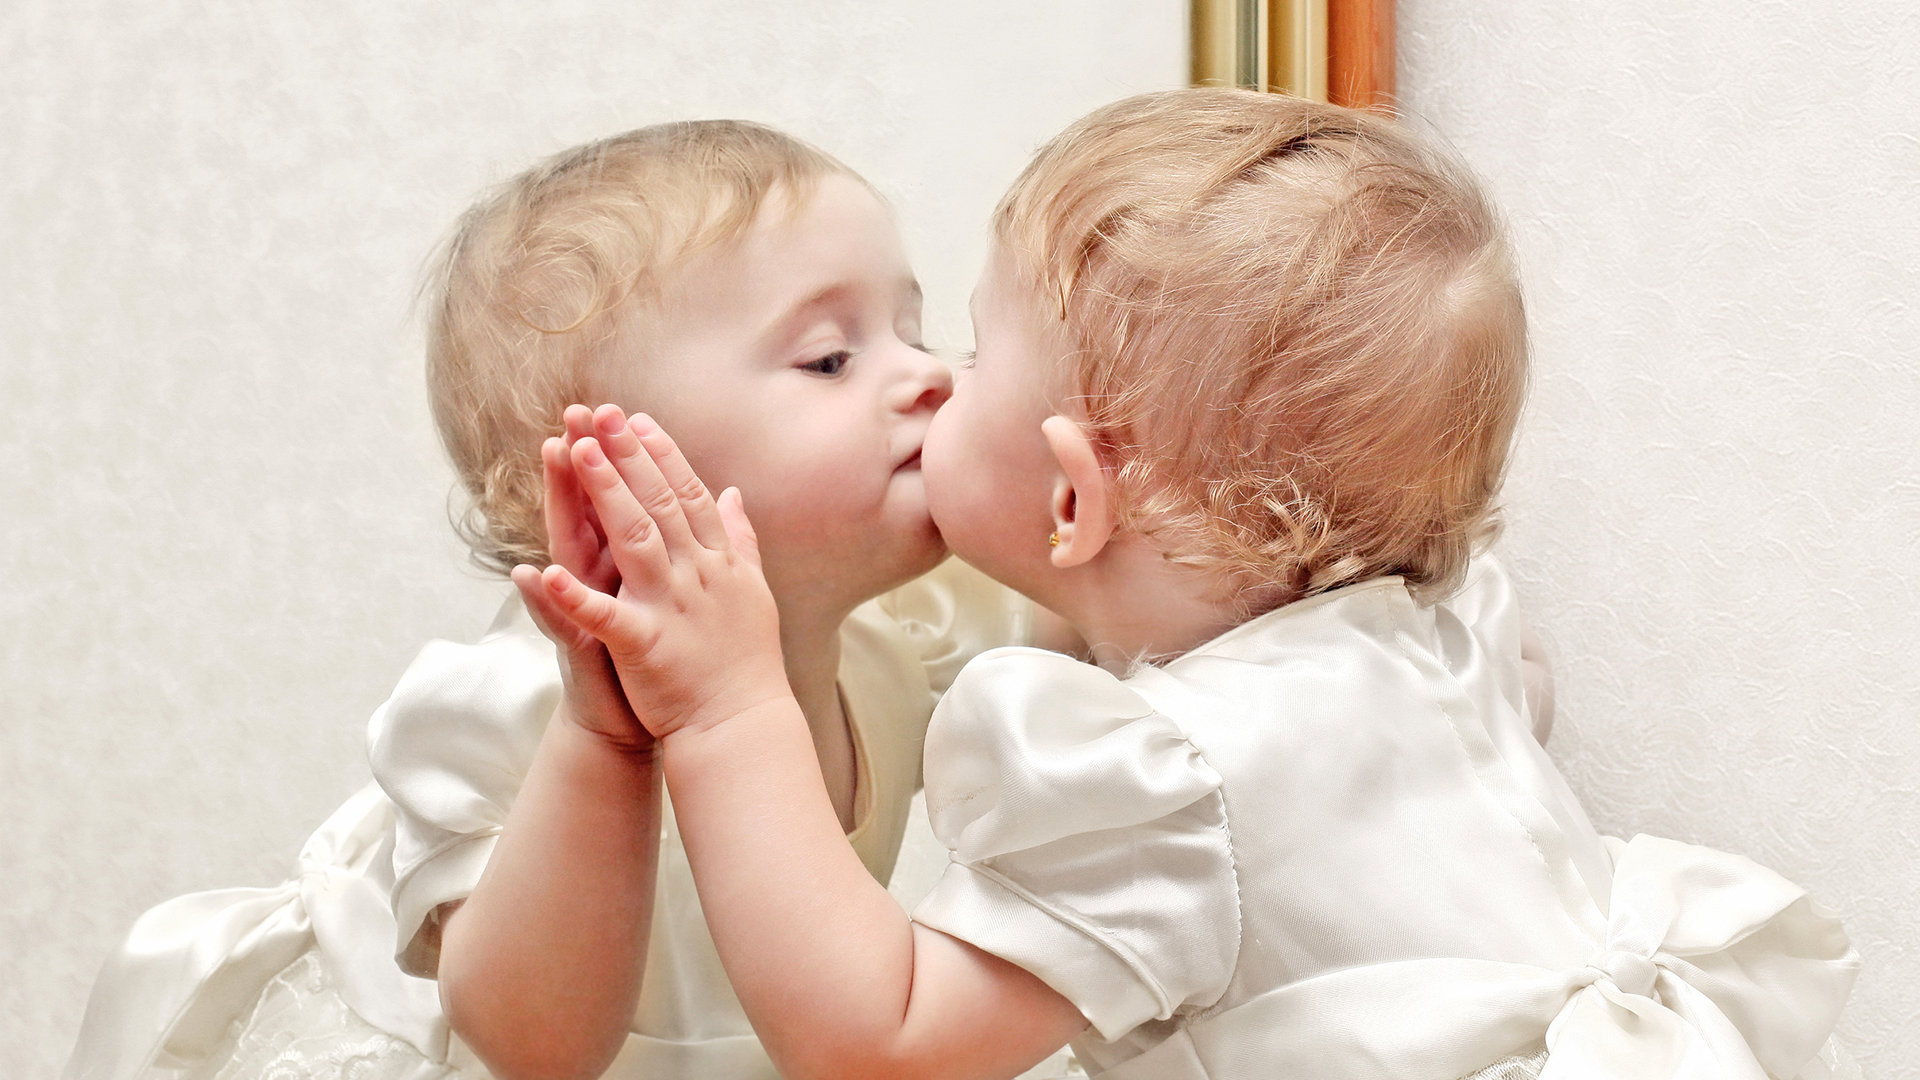 A little girl gives herself a kiss in a mirror.